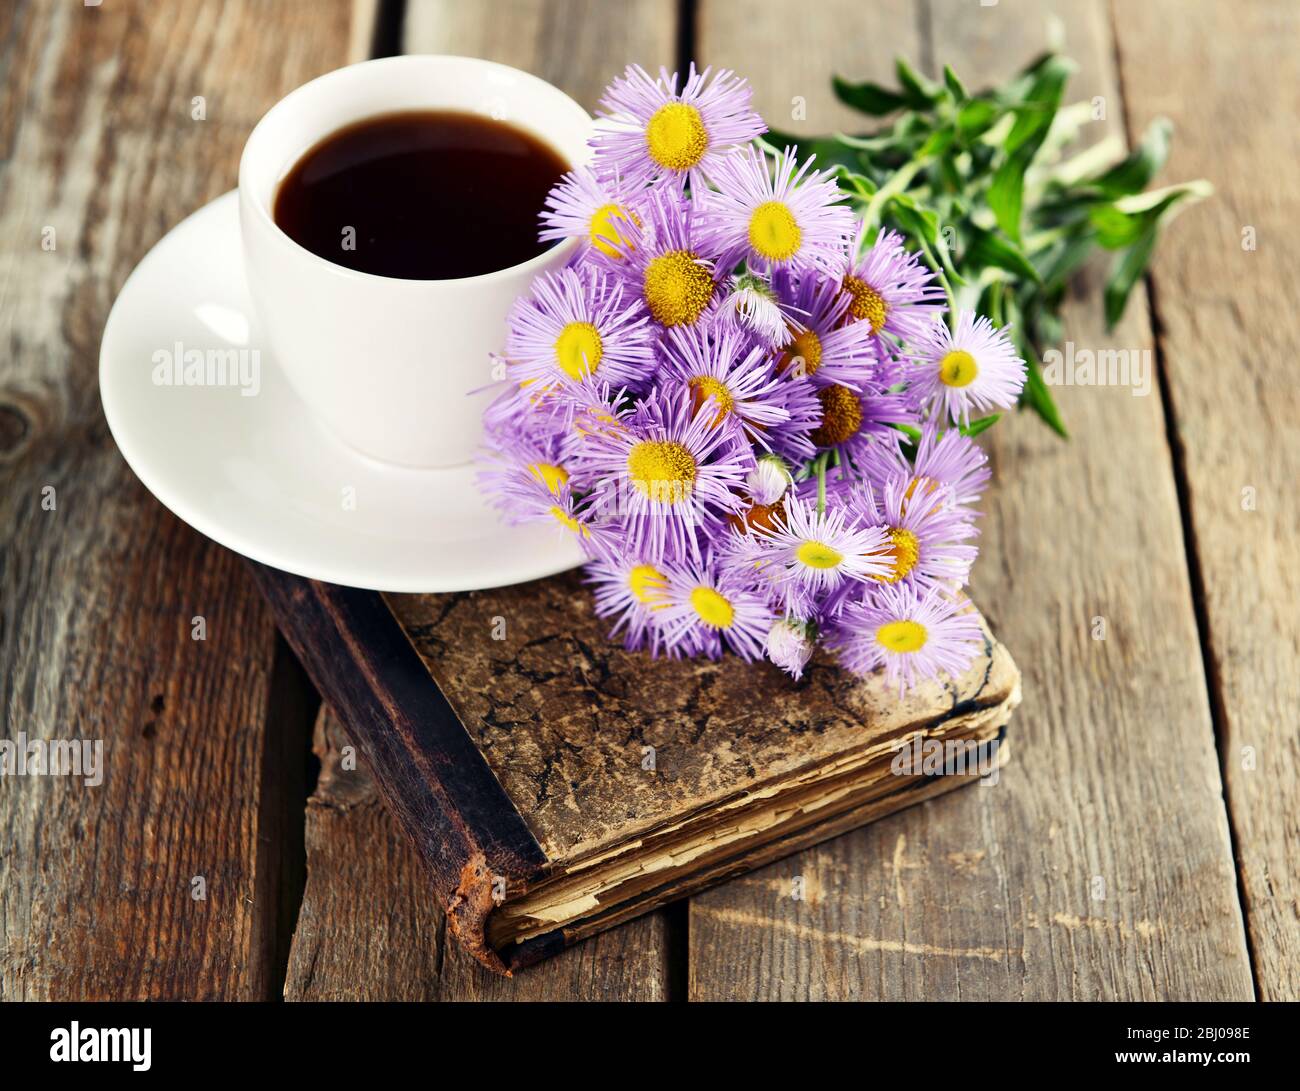 Old book with beautiful flowers and cup of tea on wooden table close up Stock Photo